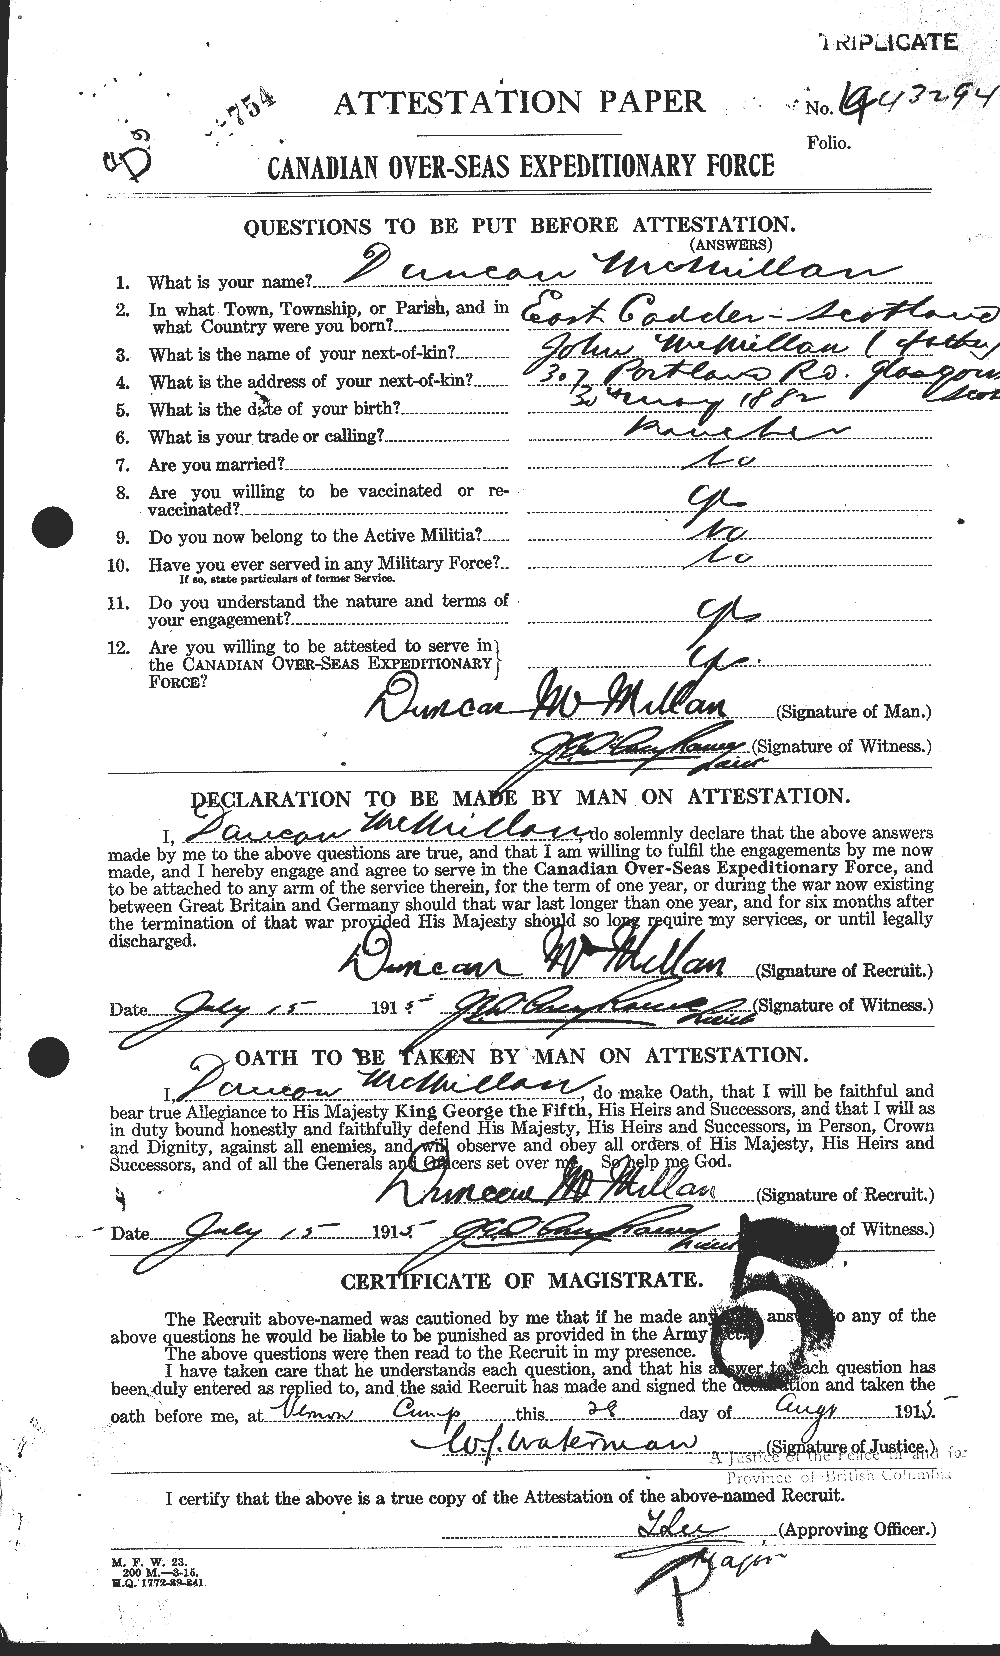 Personnel Records of the First World War - CEF 537650a